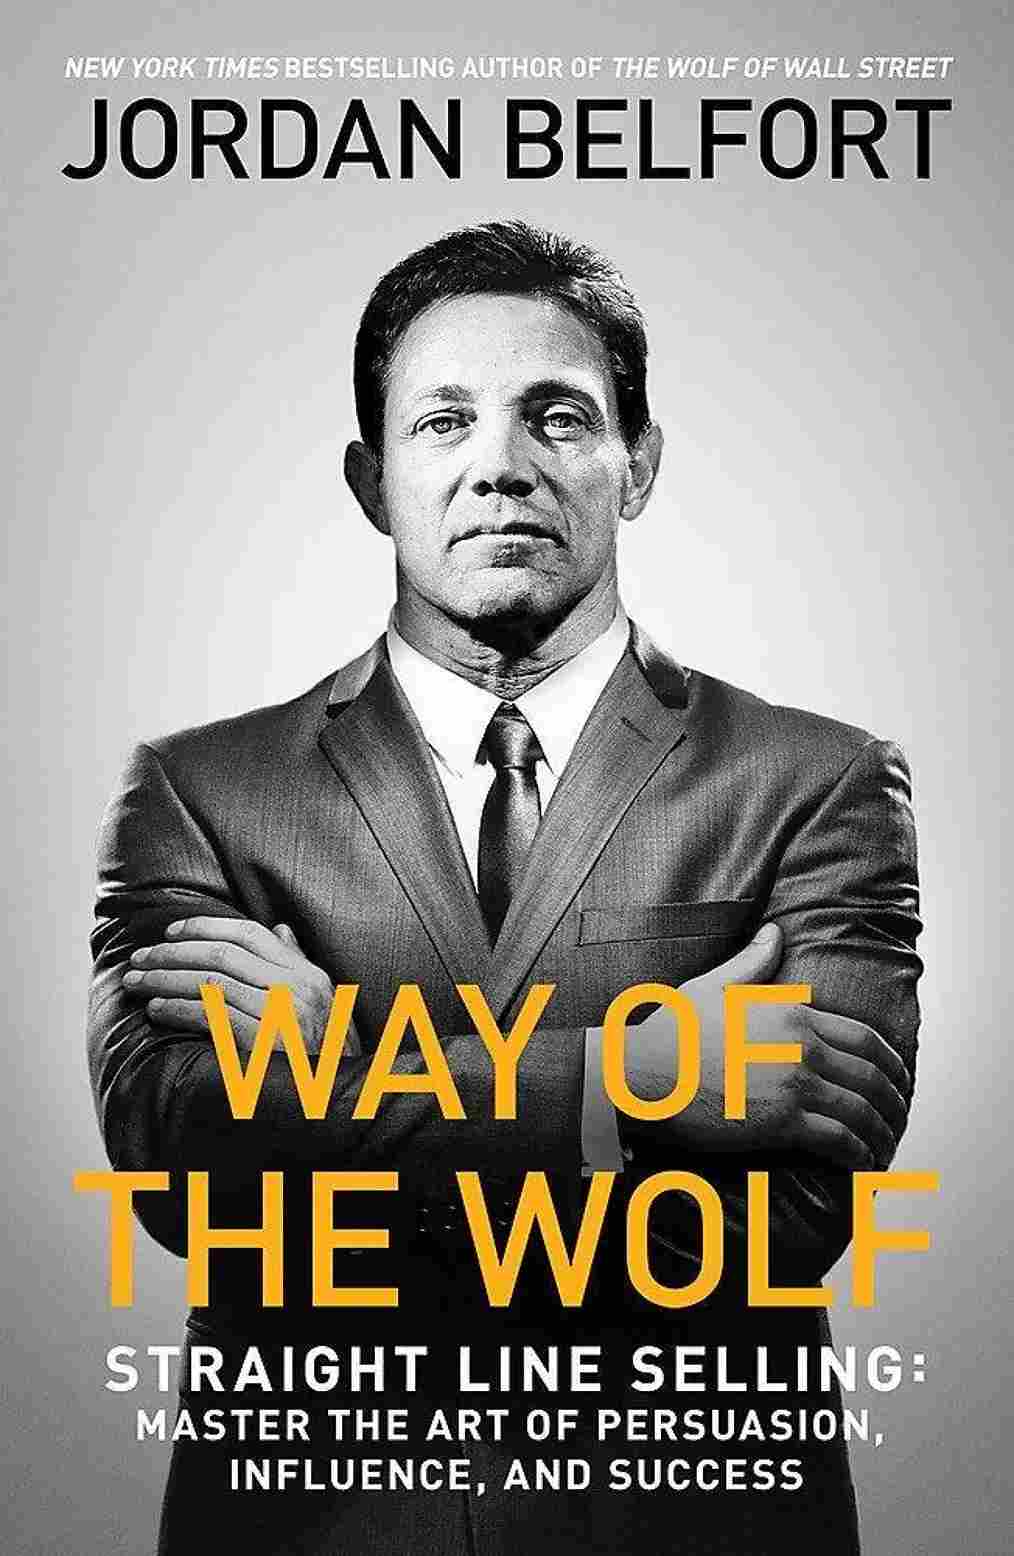 Way of the Wolf: Straight Line Selling: Master the Art of Persuasion, Influence, and Success Paperback -(New) Jordan Belfort - 99BooksStore